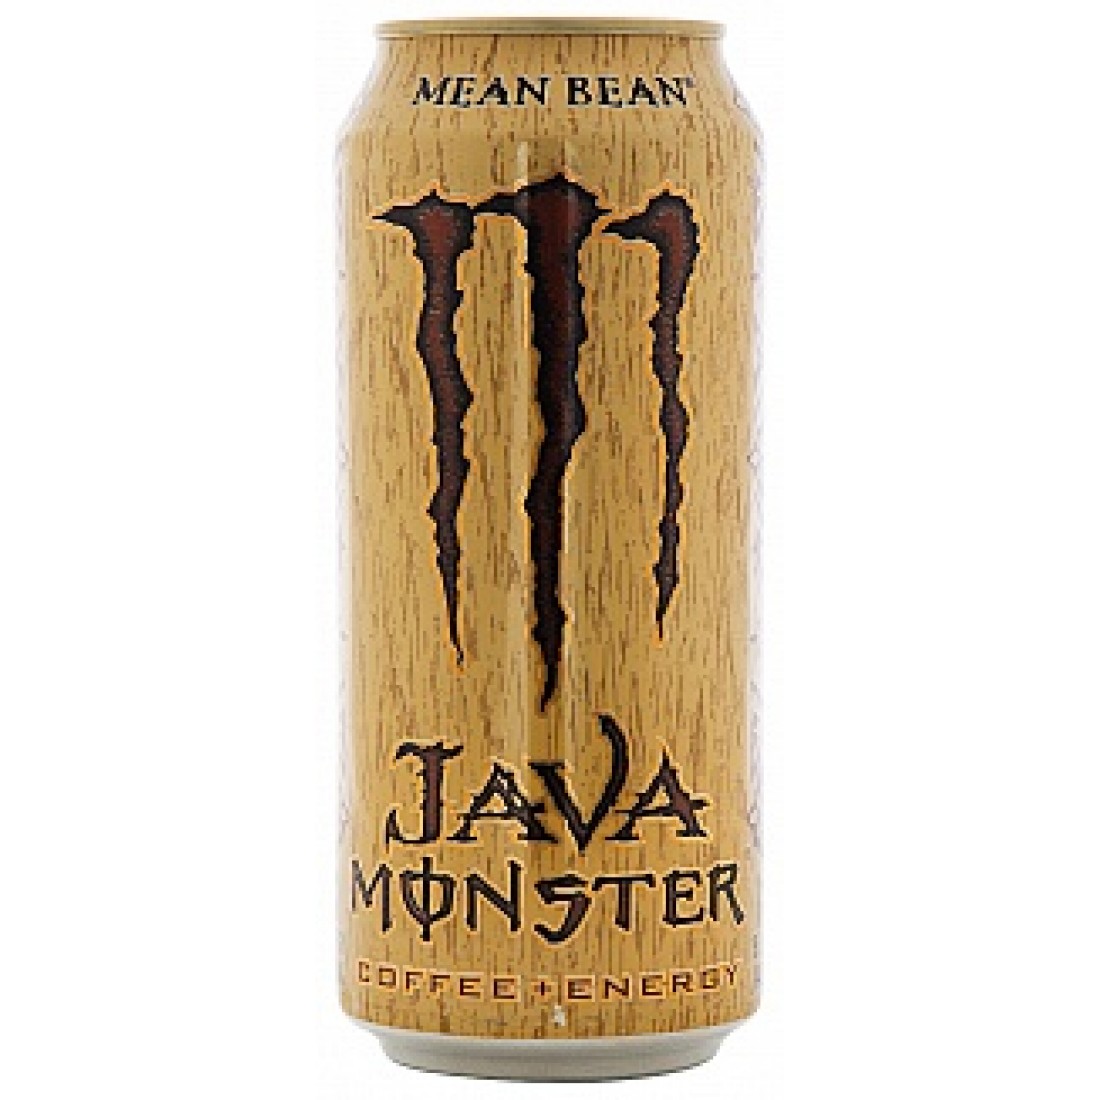 taurine in monster mean bean drink